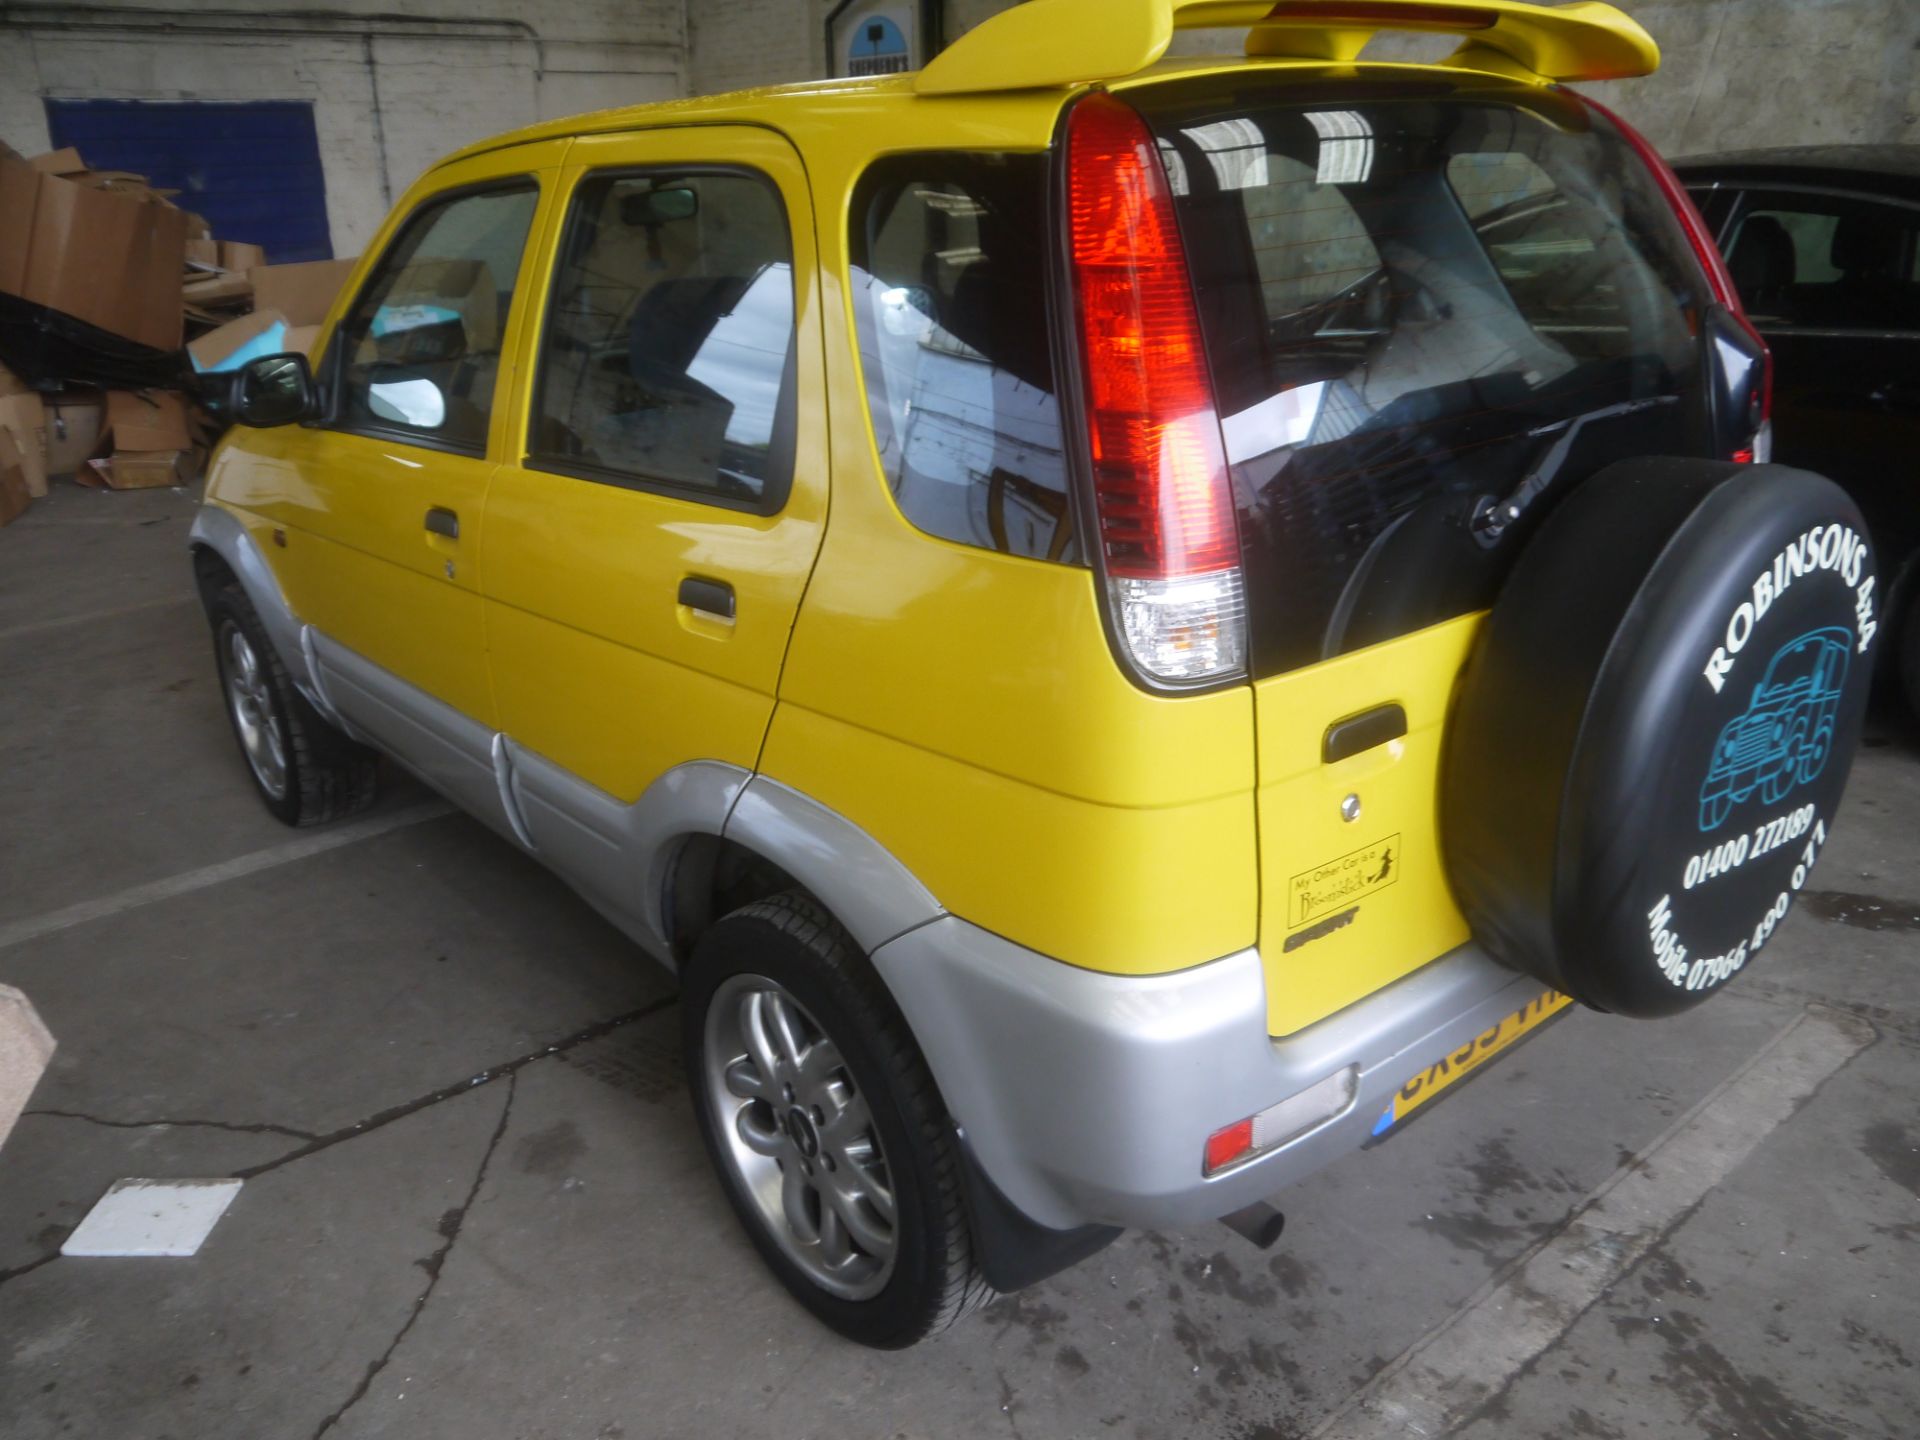 55 plate Daihatsu Terios Sport, 1.3ltr with a Automatic gearbox, 157,265 miles (unchecked), MOT - Image 2 of 10